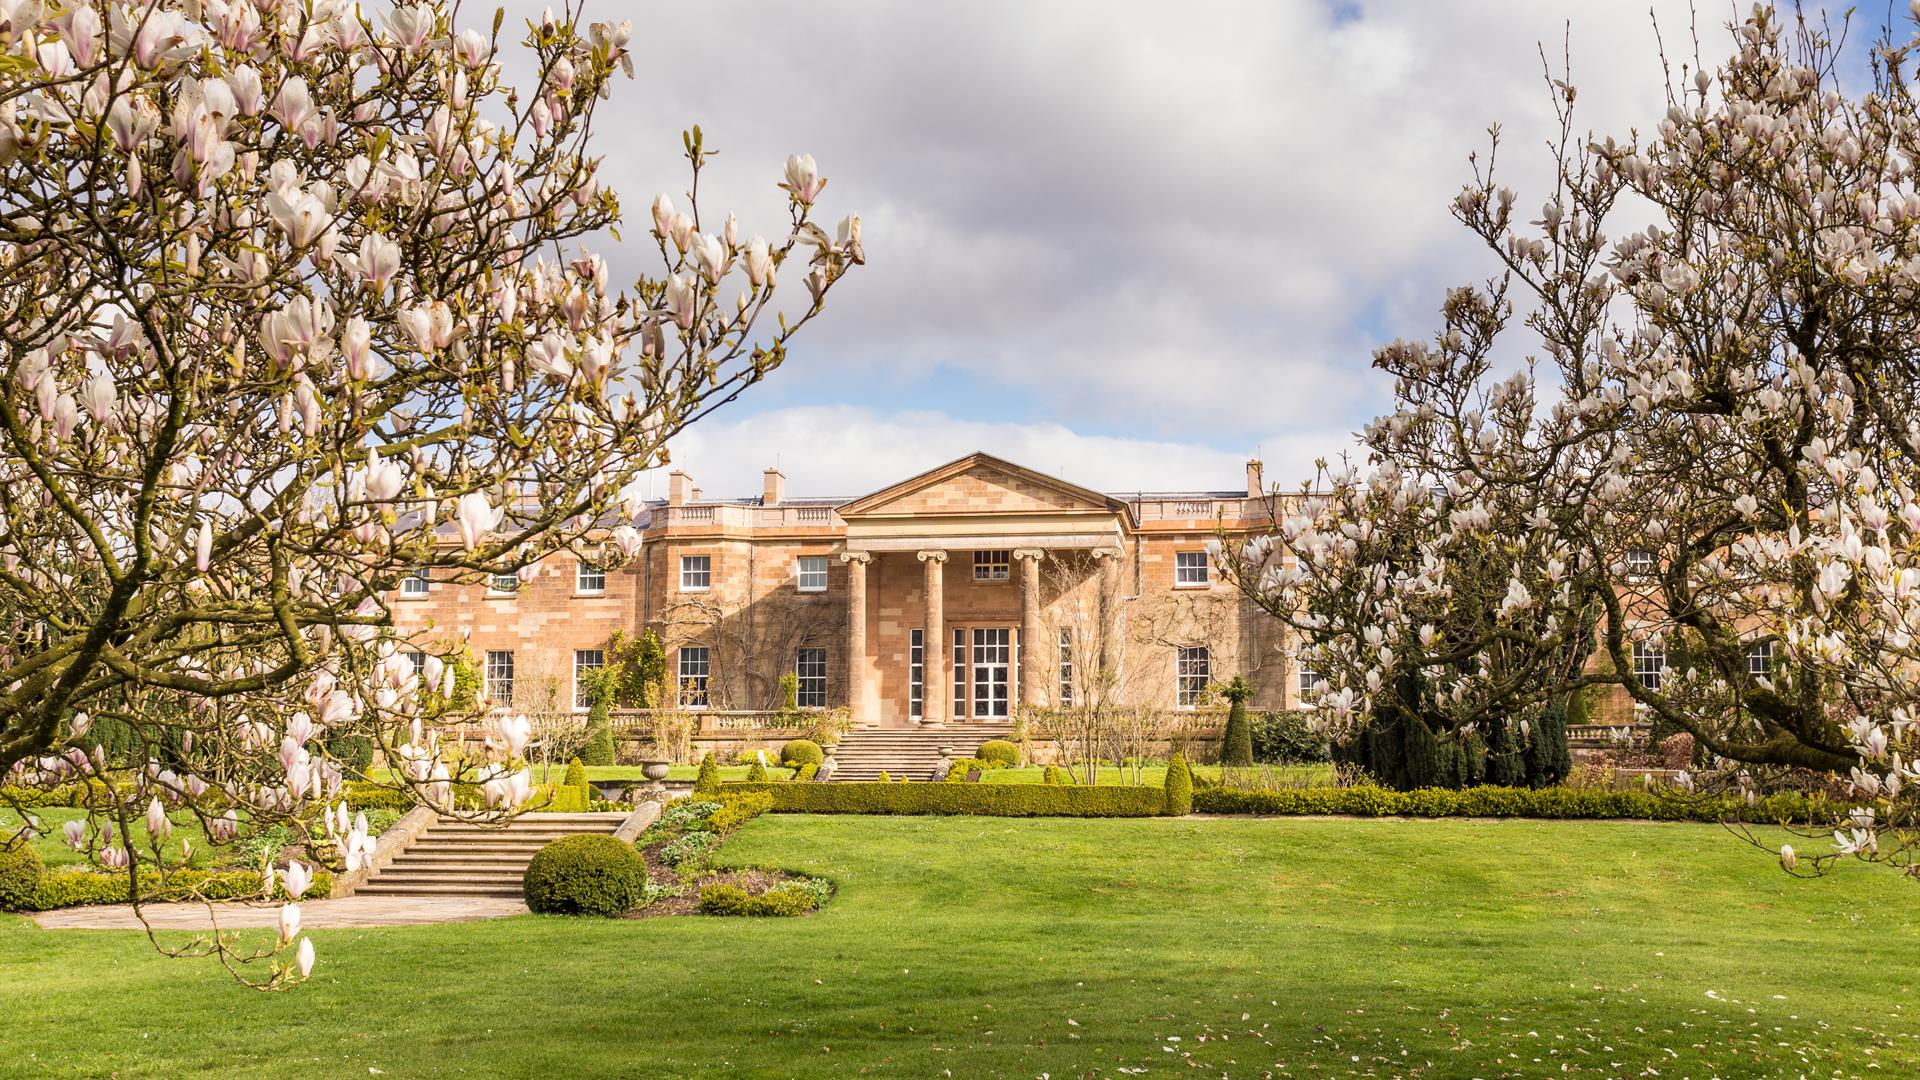 Image is of the back entrance of Hillsborough Castle